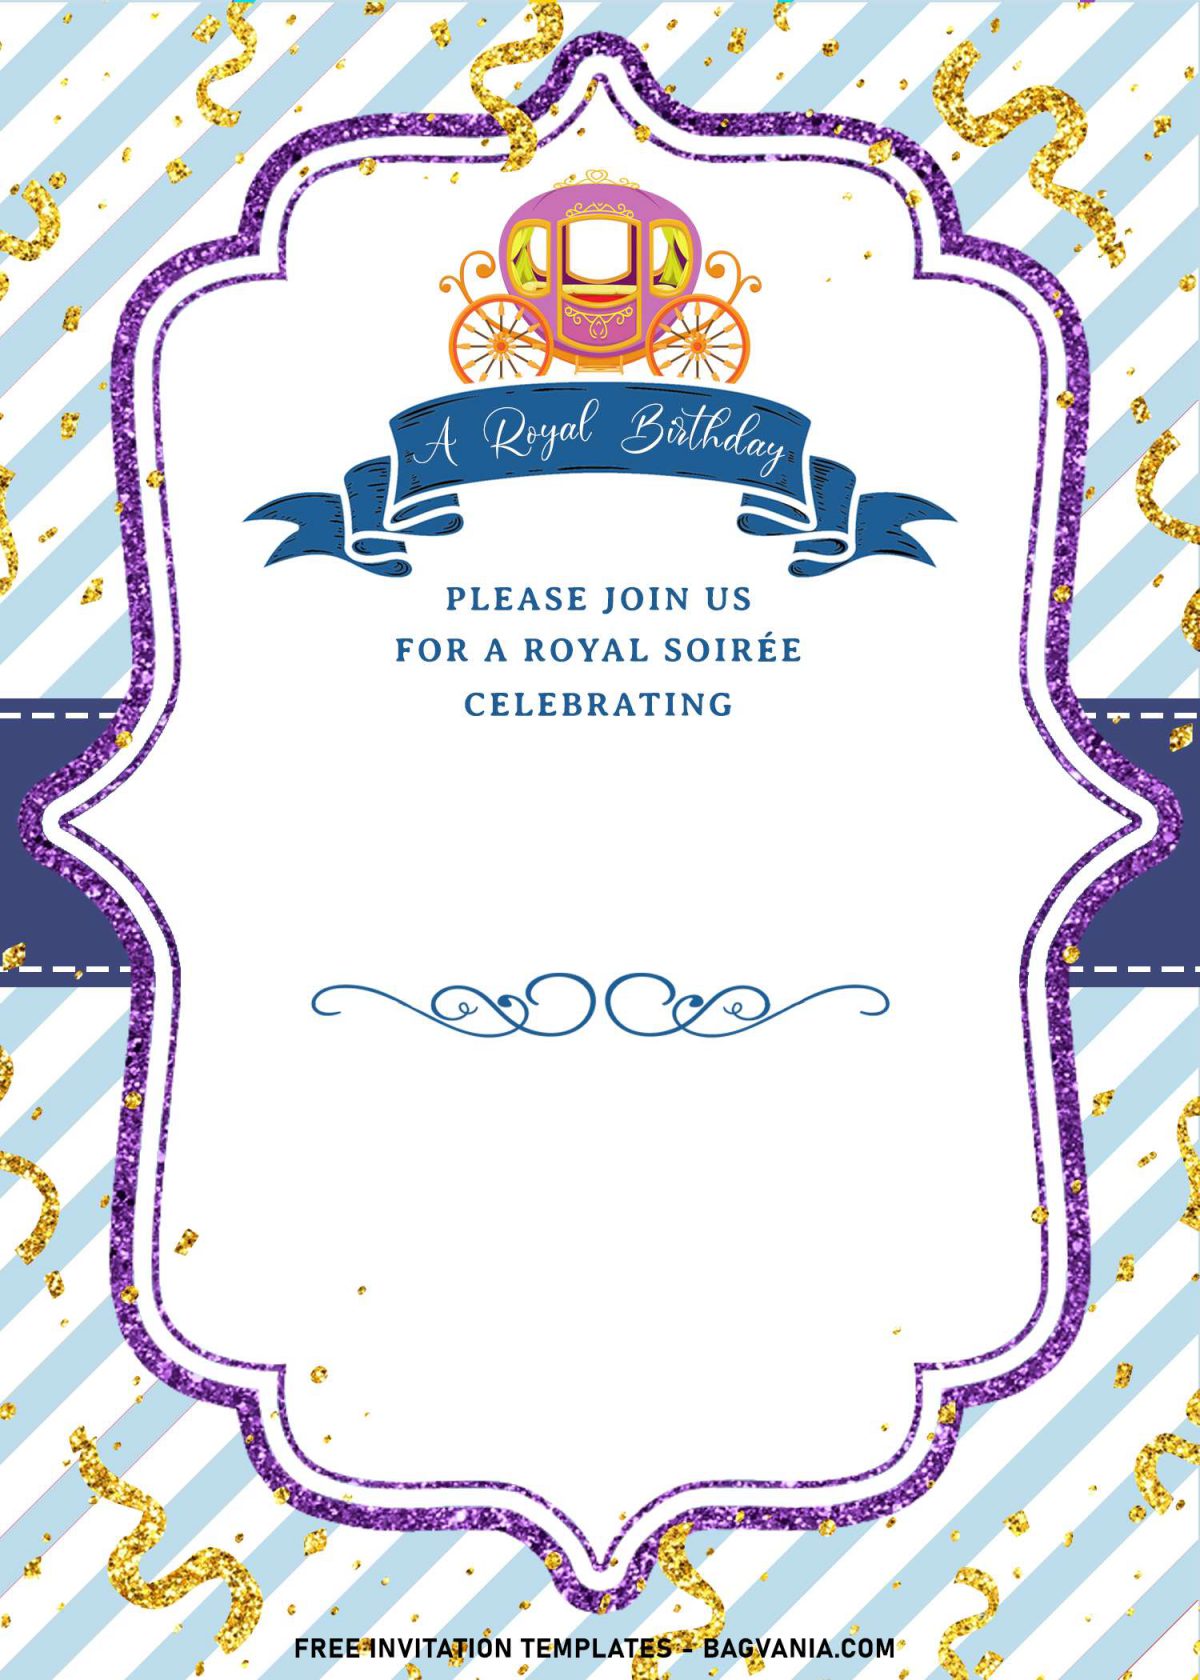 8+ Royal Birthday Invitation Templates For Your Kids Upcoming Birthday Party and has Princess Carriage